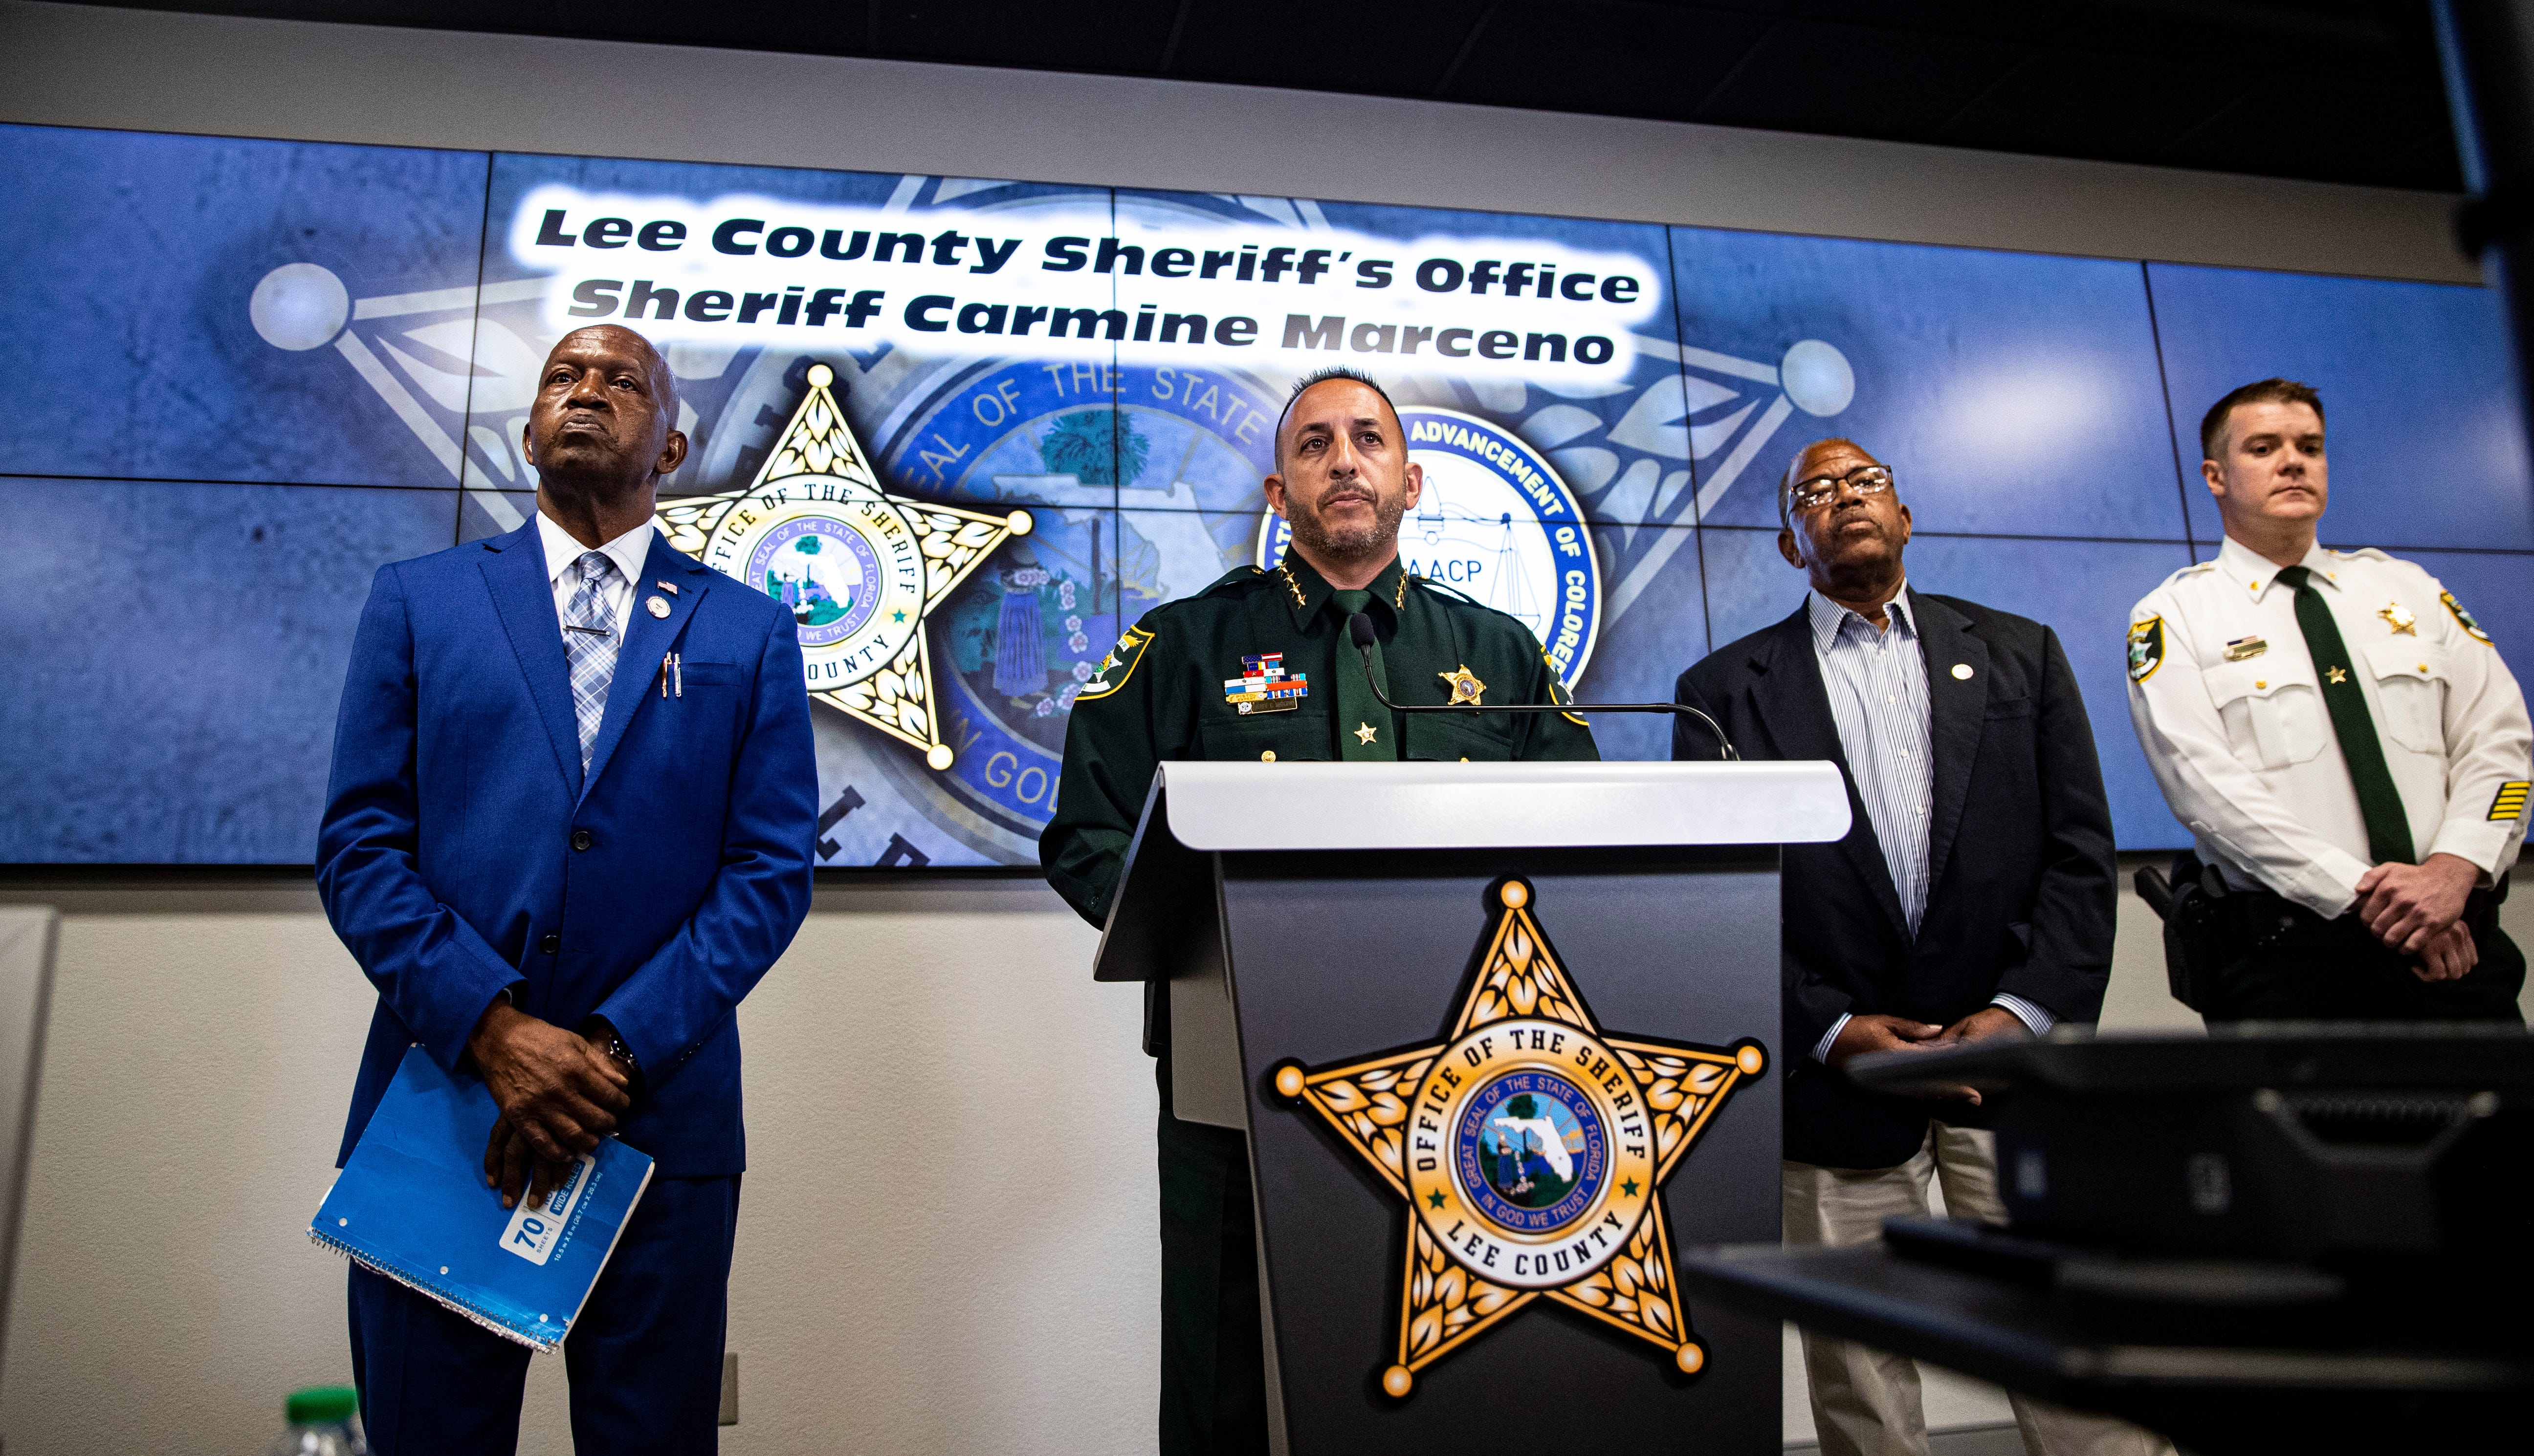 Lee County Jail 12th death of 2022: NAACP findings rule out foul play